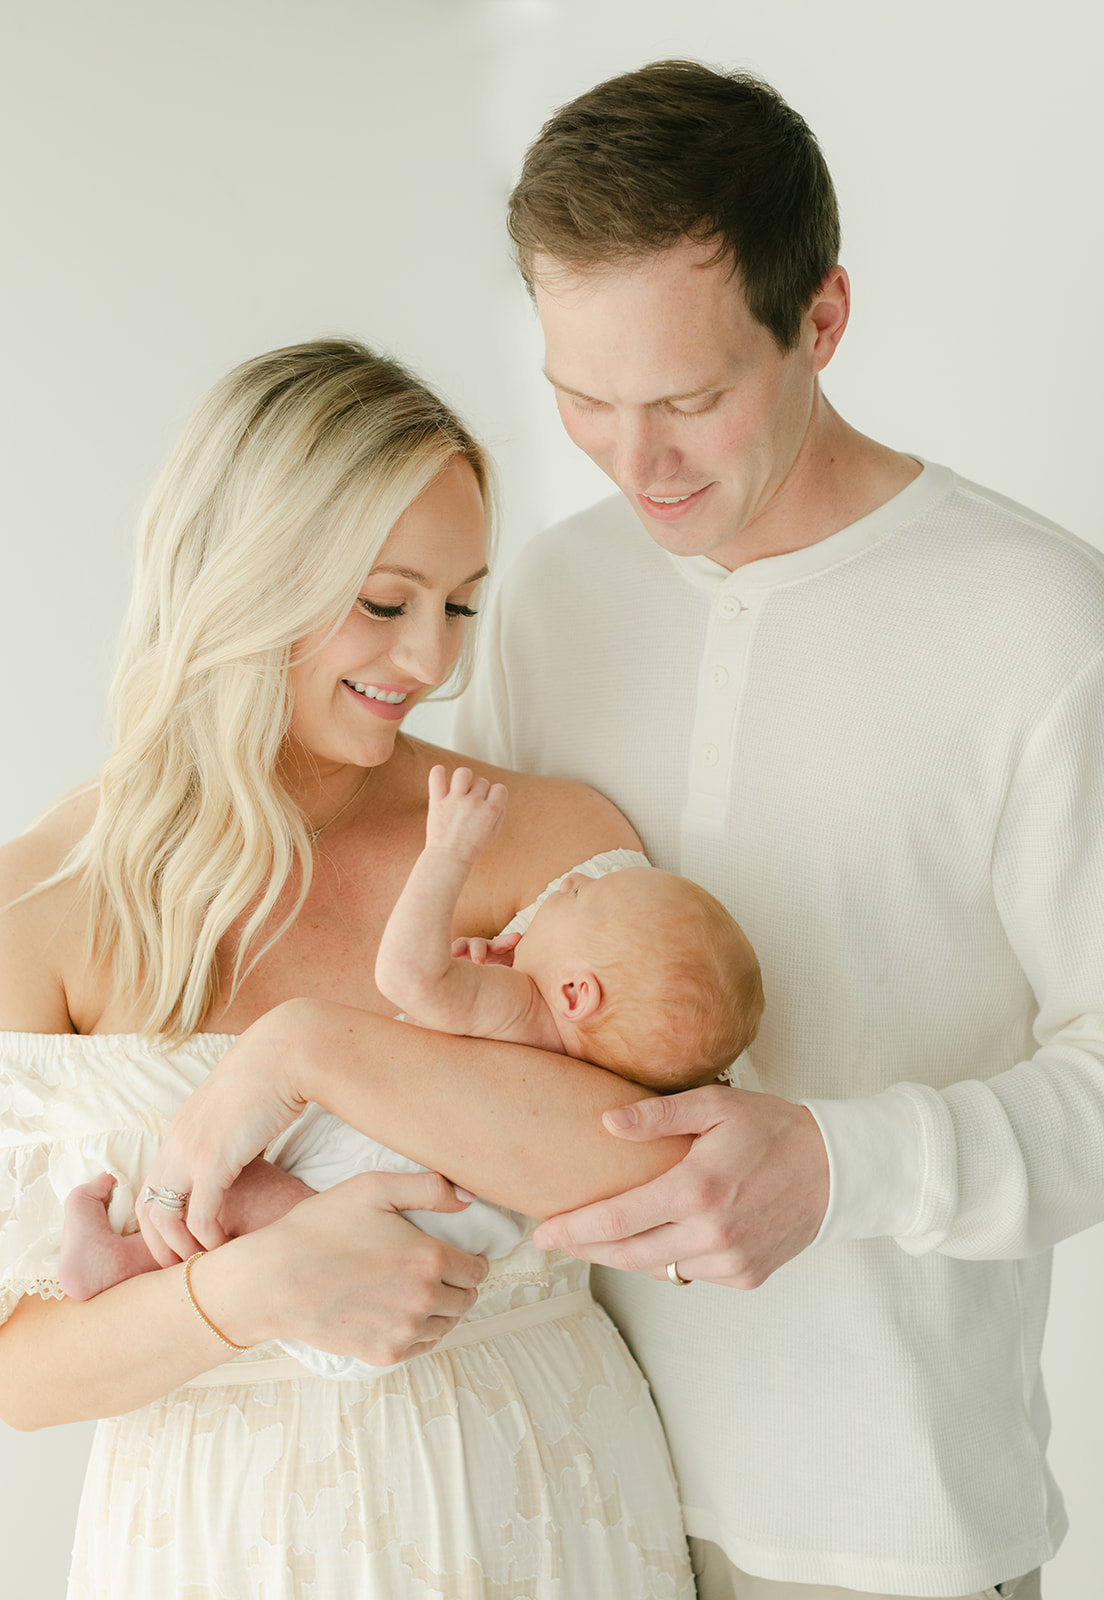 newborn baby session in nashville tennessee. photo of mom, dad and newborn baby